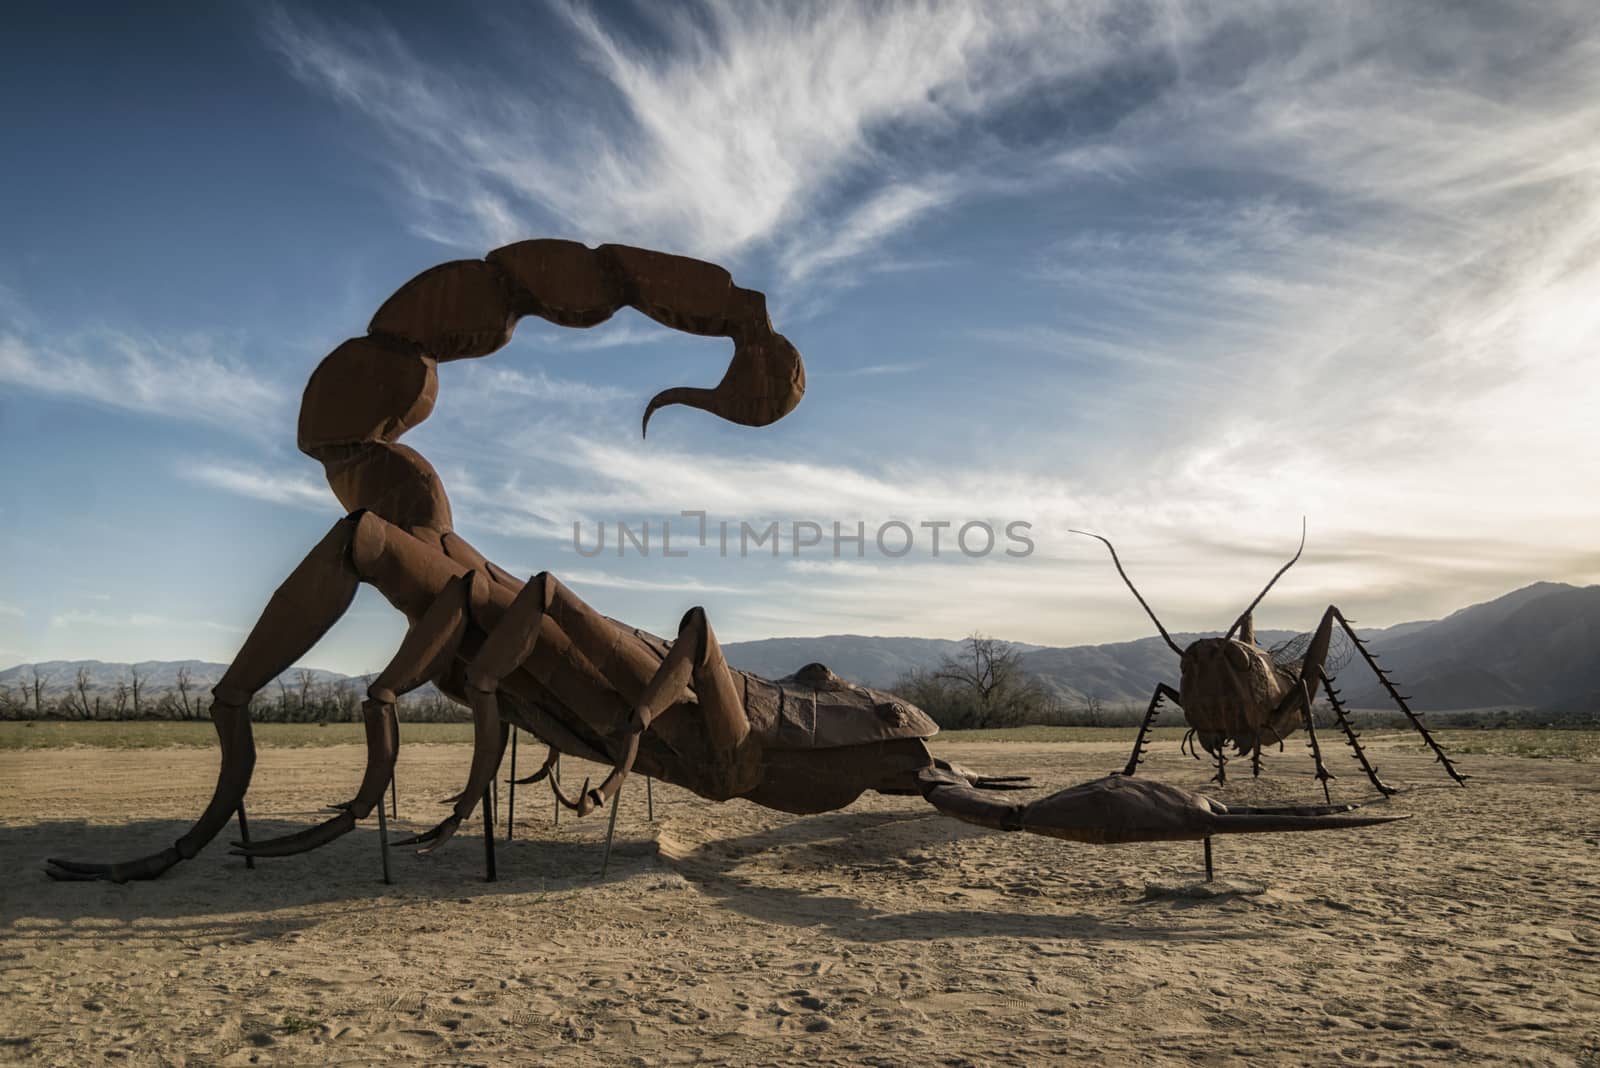 Metal Insects Sculpture in the Desert by patricklienin